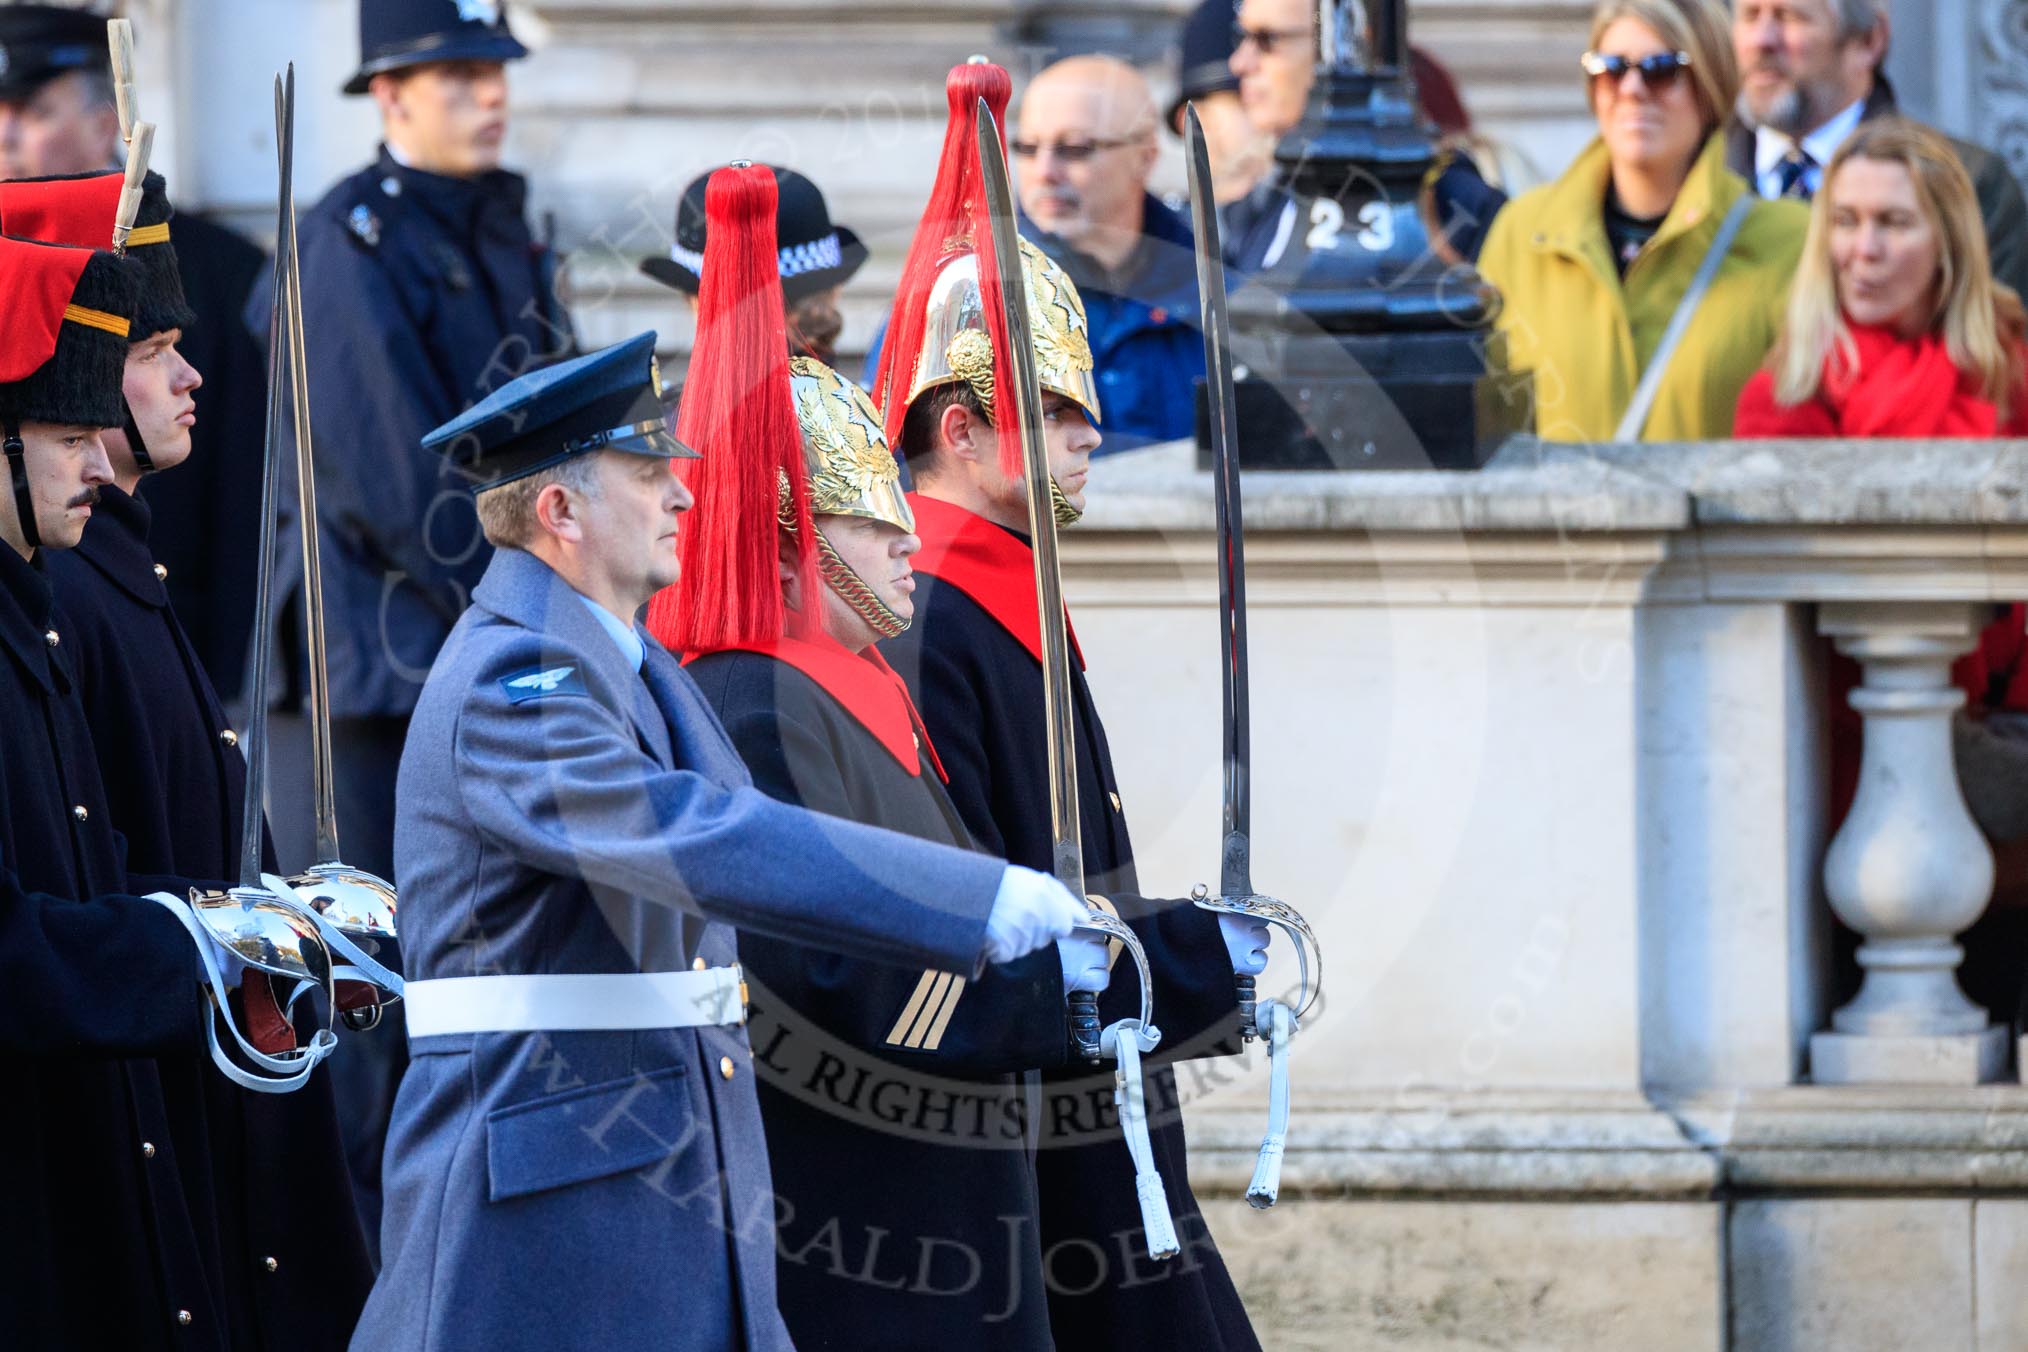 The first group of the Armed Forces arrives on Whitehall before the Remembrance Sunday Cenotaph Ceremony 2018 at Horse Guards Parade, Westminster, London, 11 November 2018, 09:48. They might be the "markers" for their service detachments, followed by stretcher bearers.